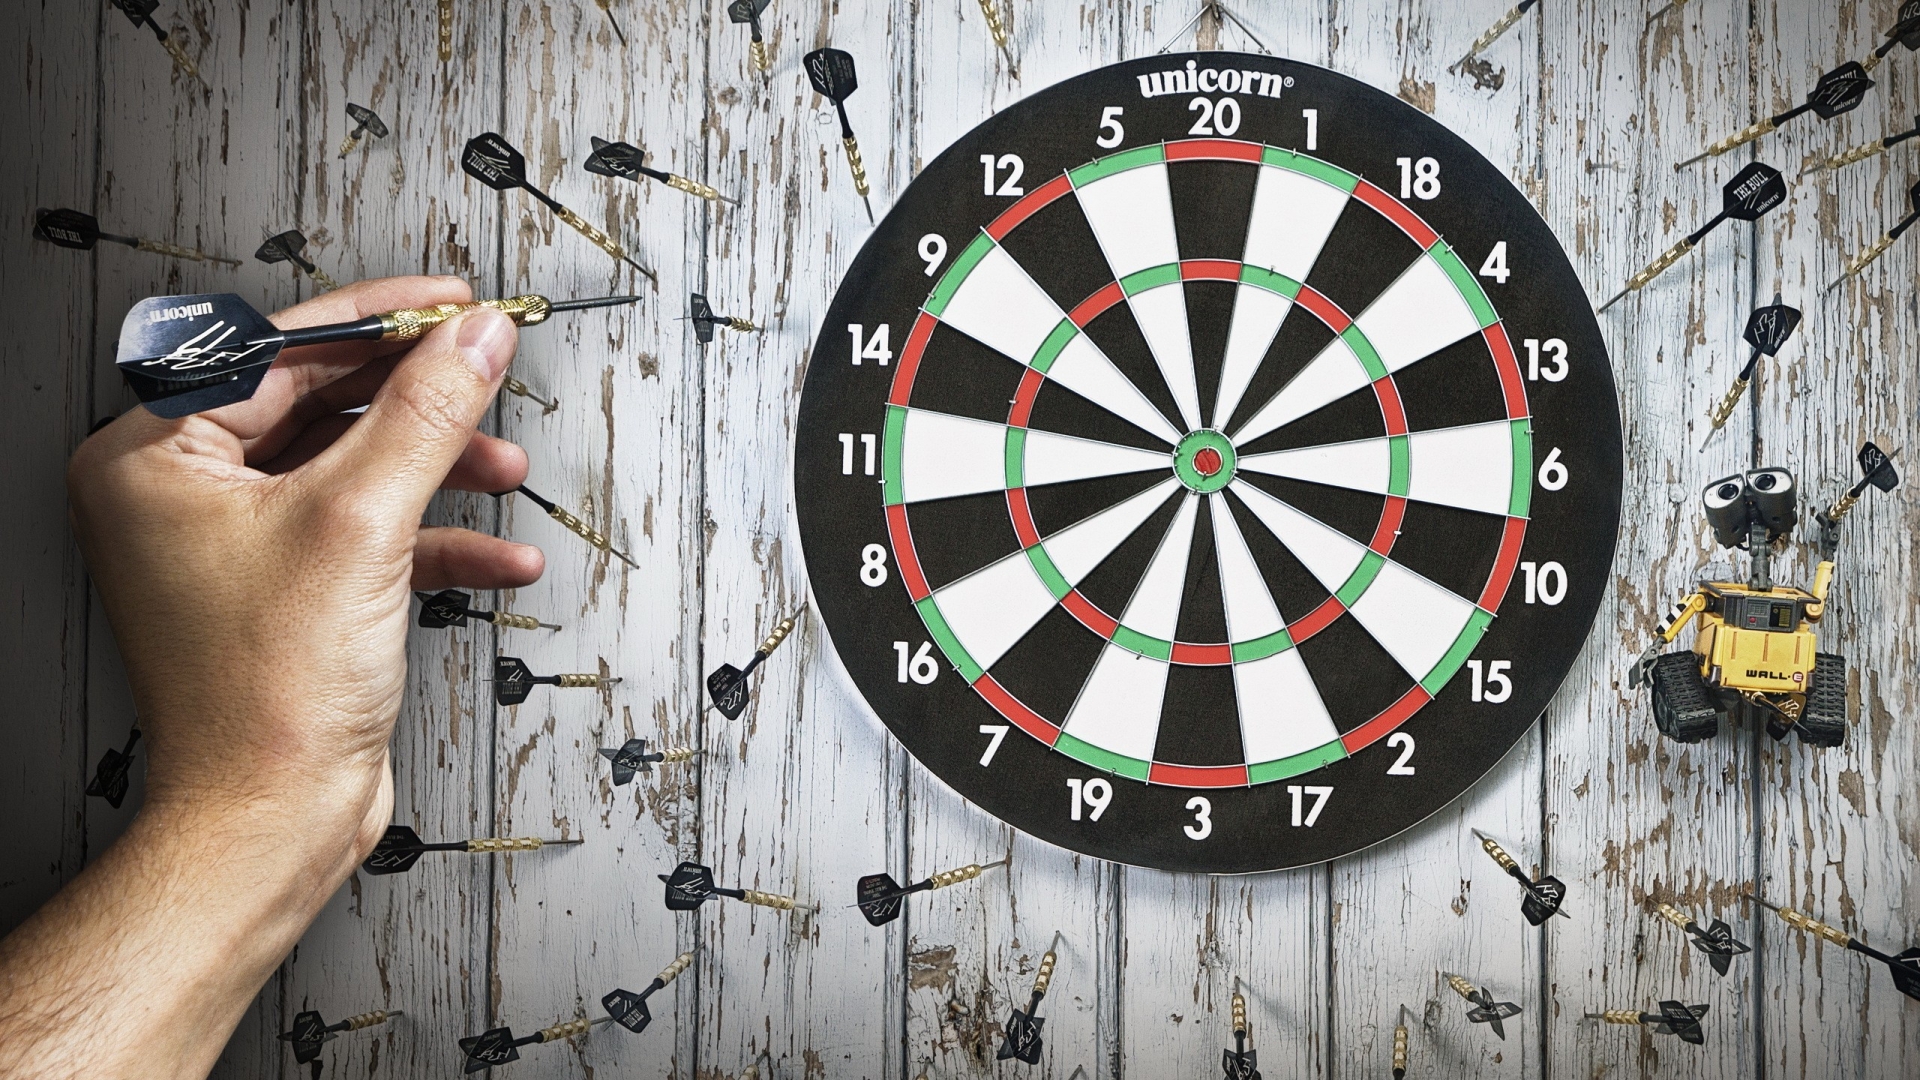 Darts Game for 1920 x 1080 HDTV 1080p resolution